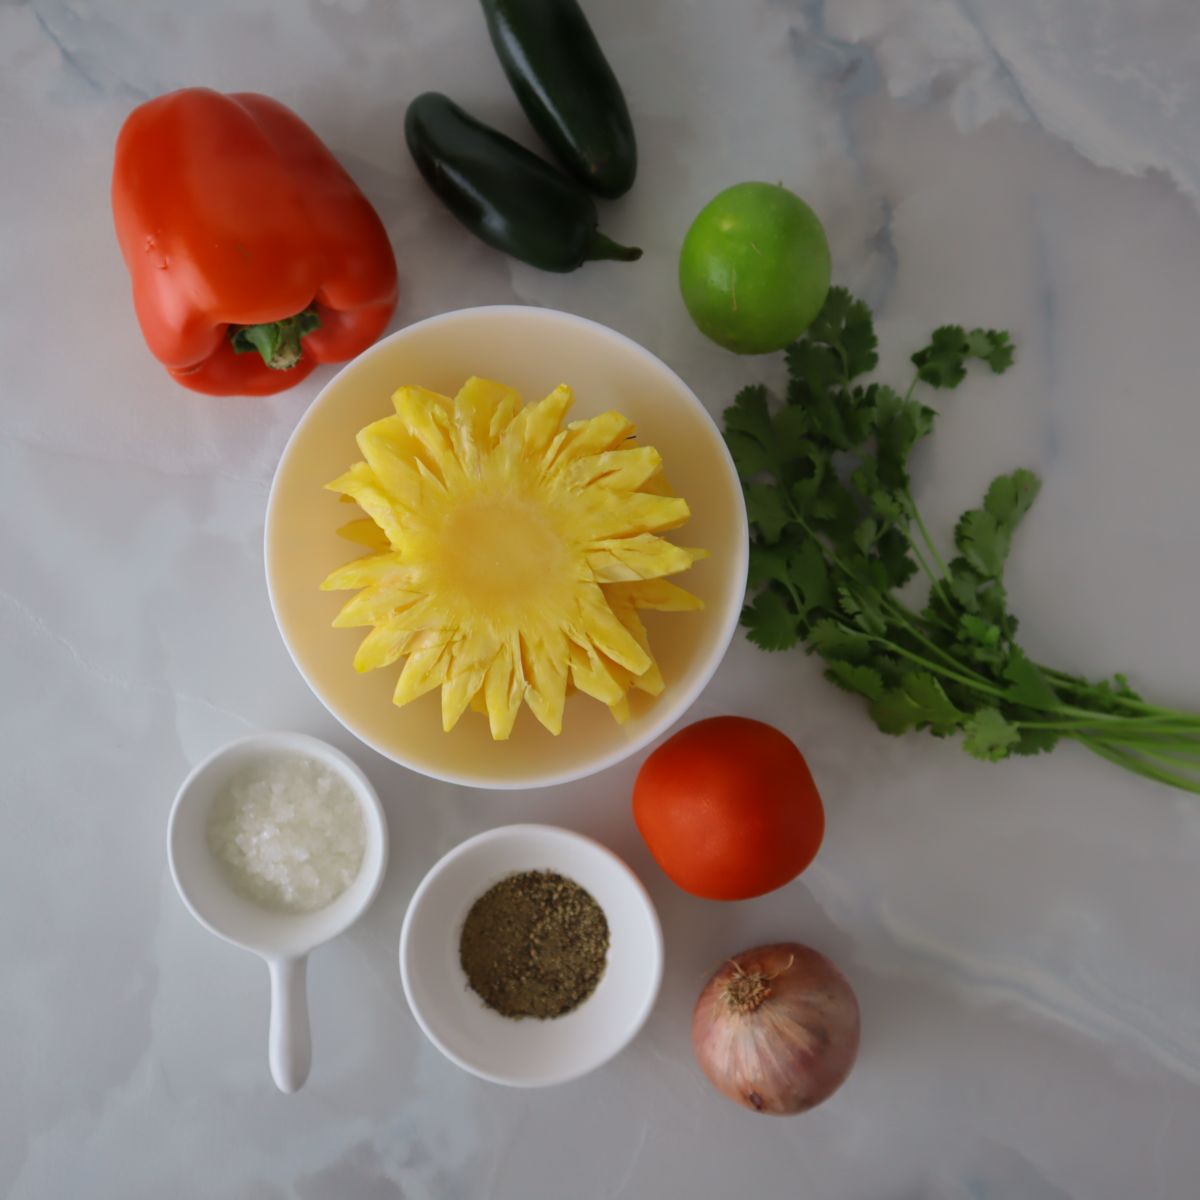 ingredients for the pineapple pico de gallo